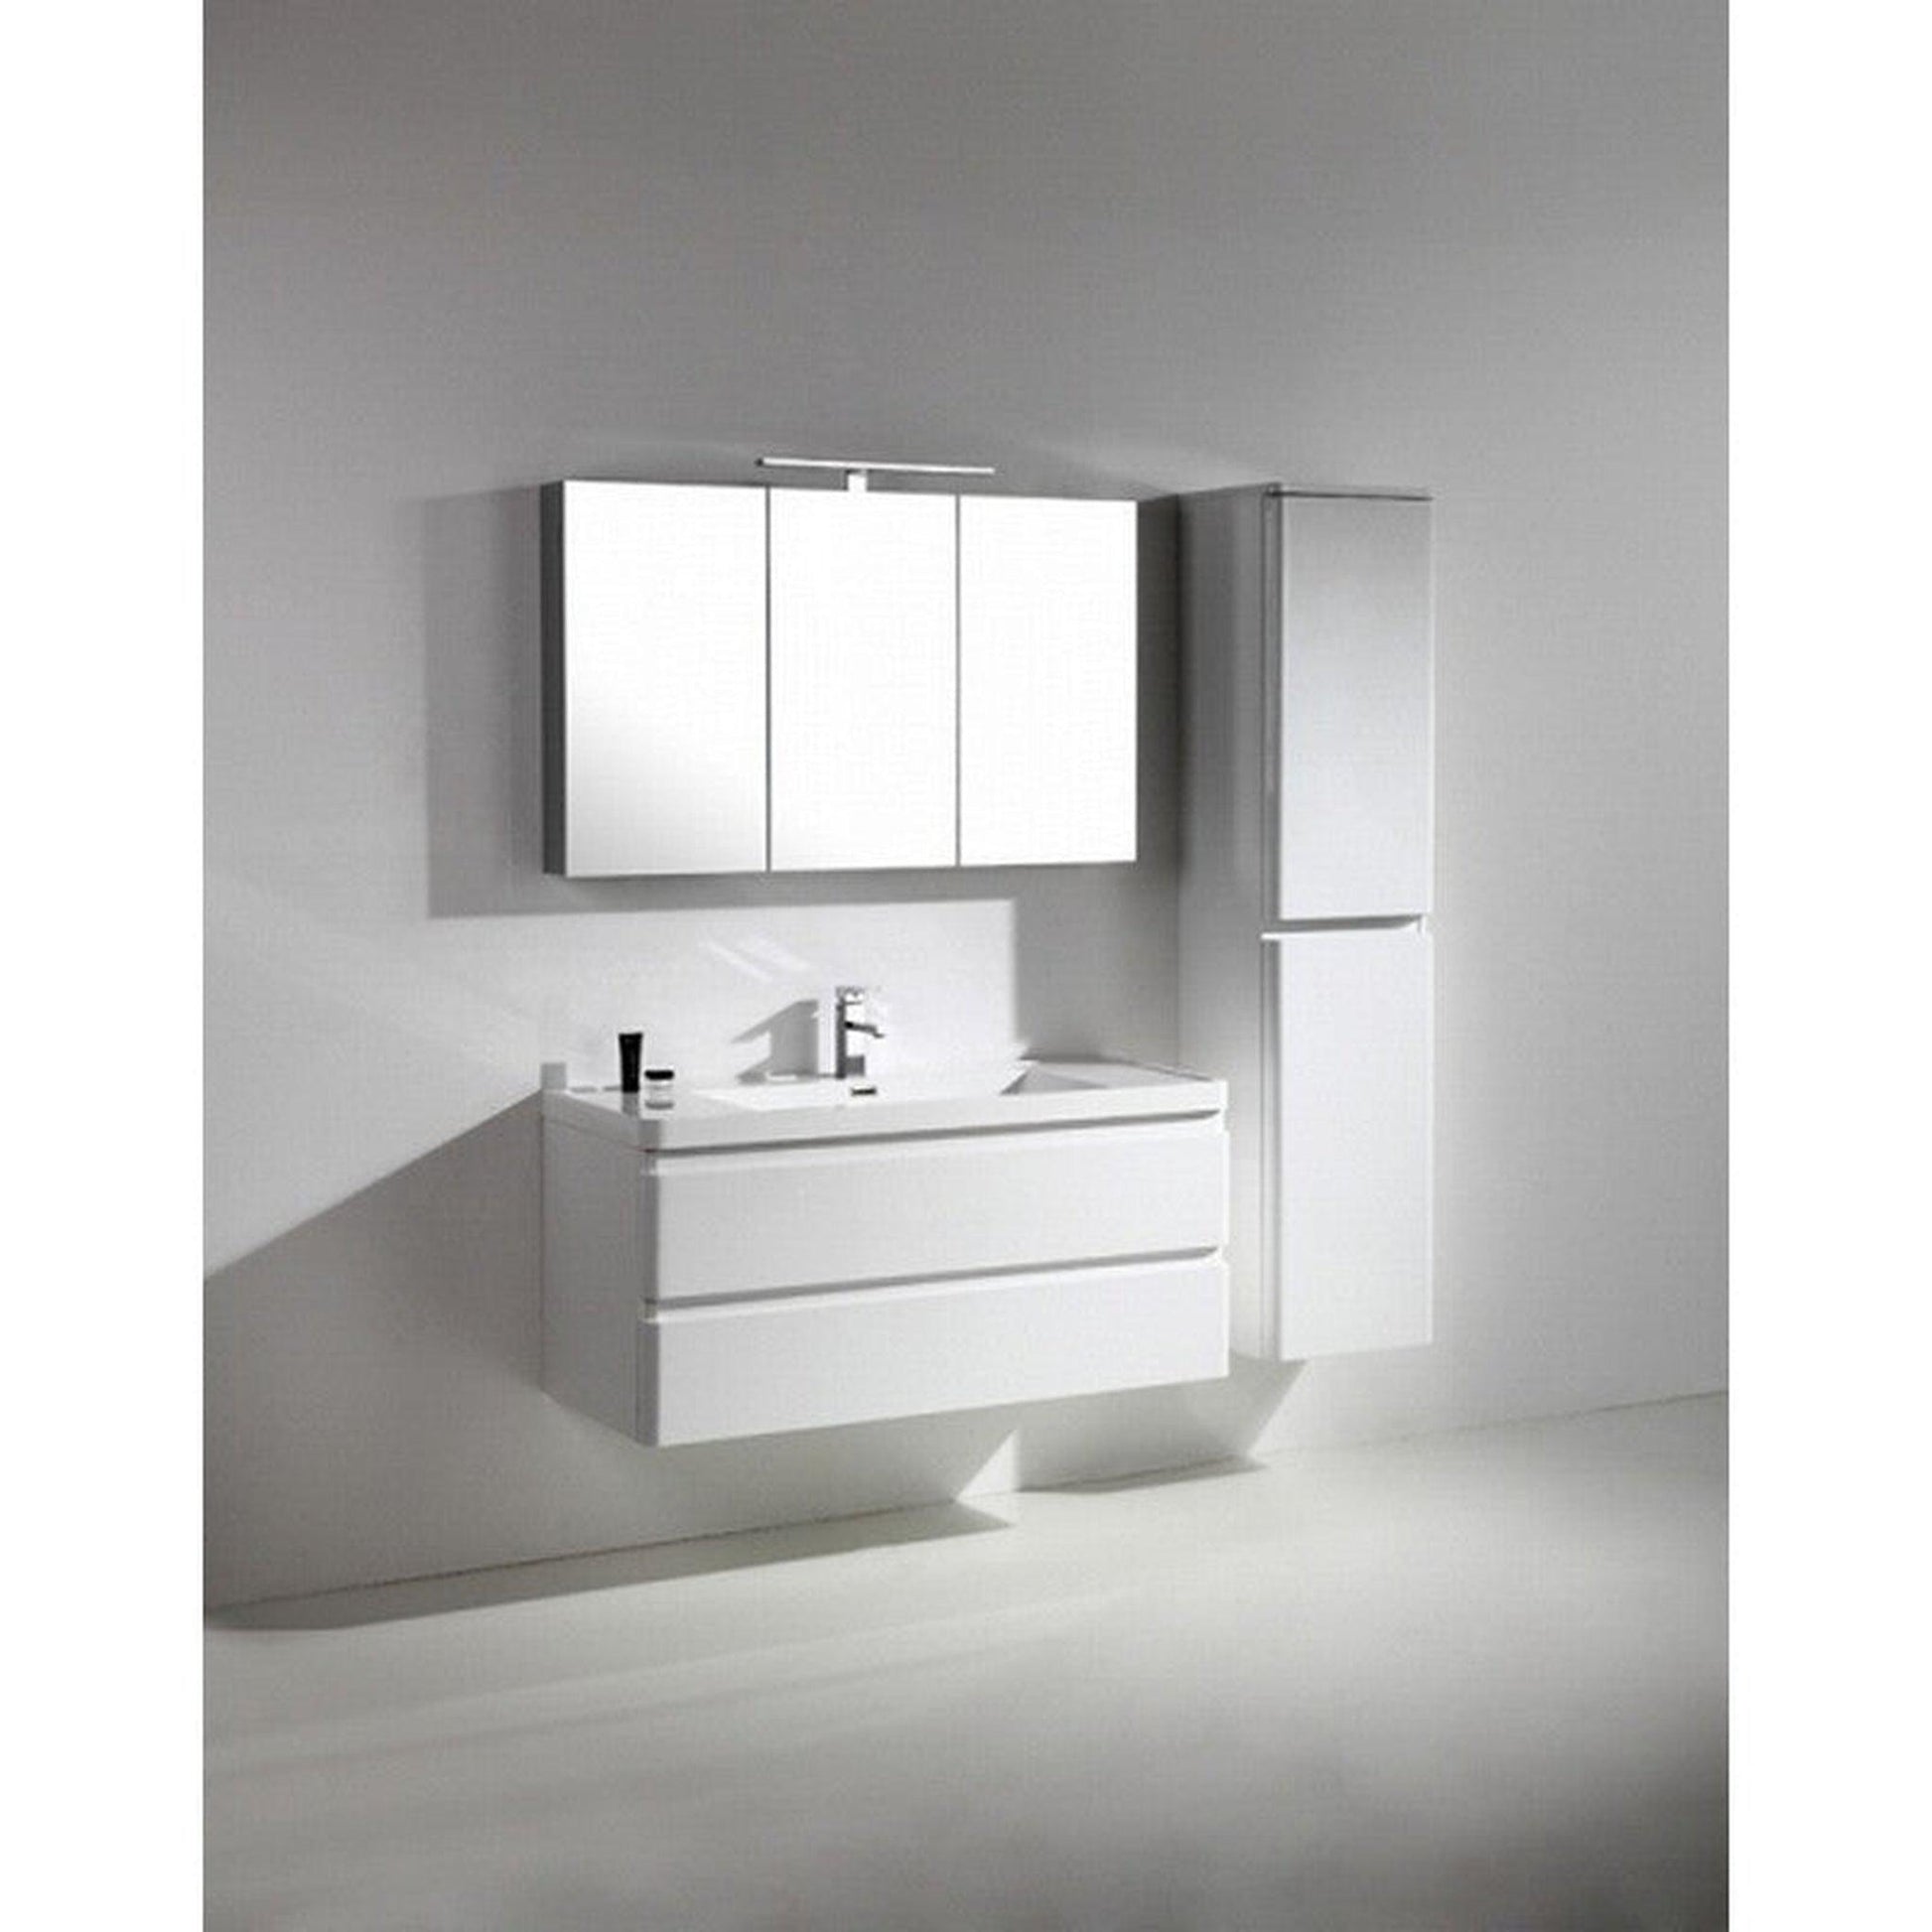 Eviva Glazzy 48" x 22" White Wall Mount Bathroom Vanity With White Single Integrated Sink